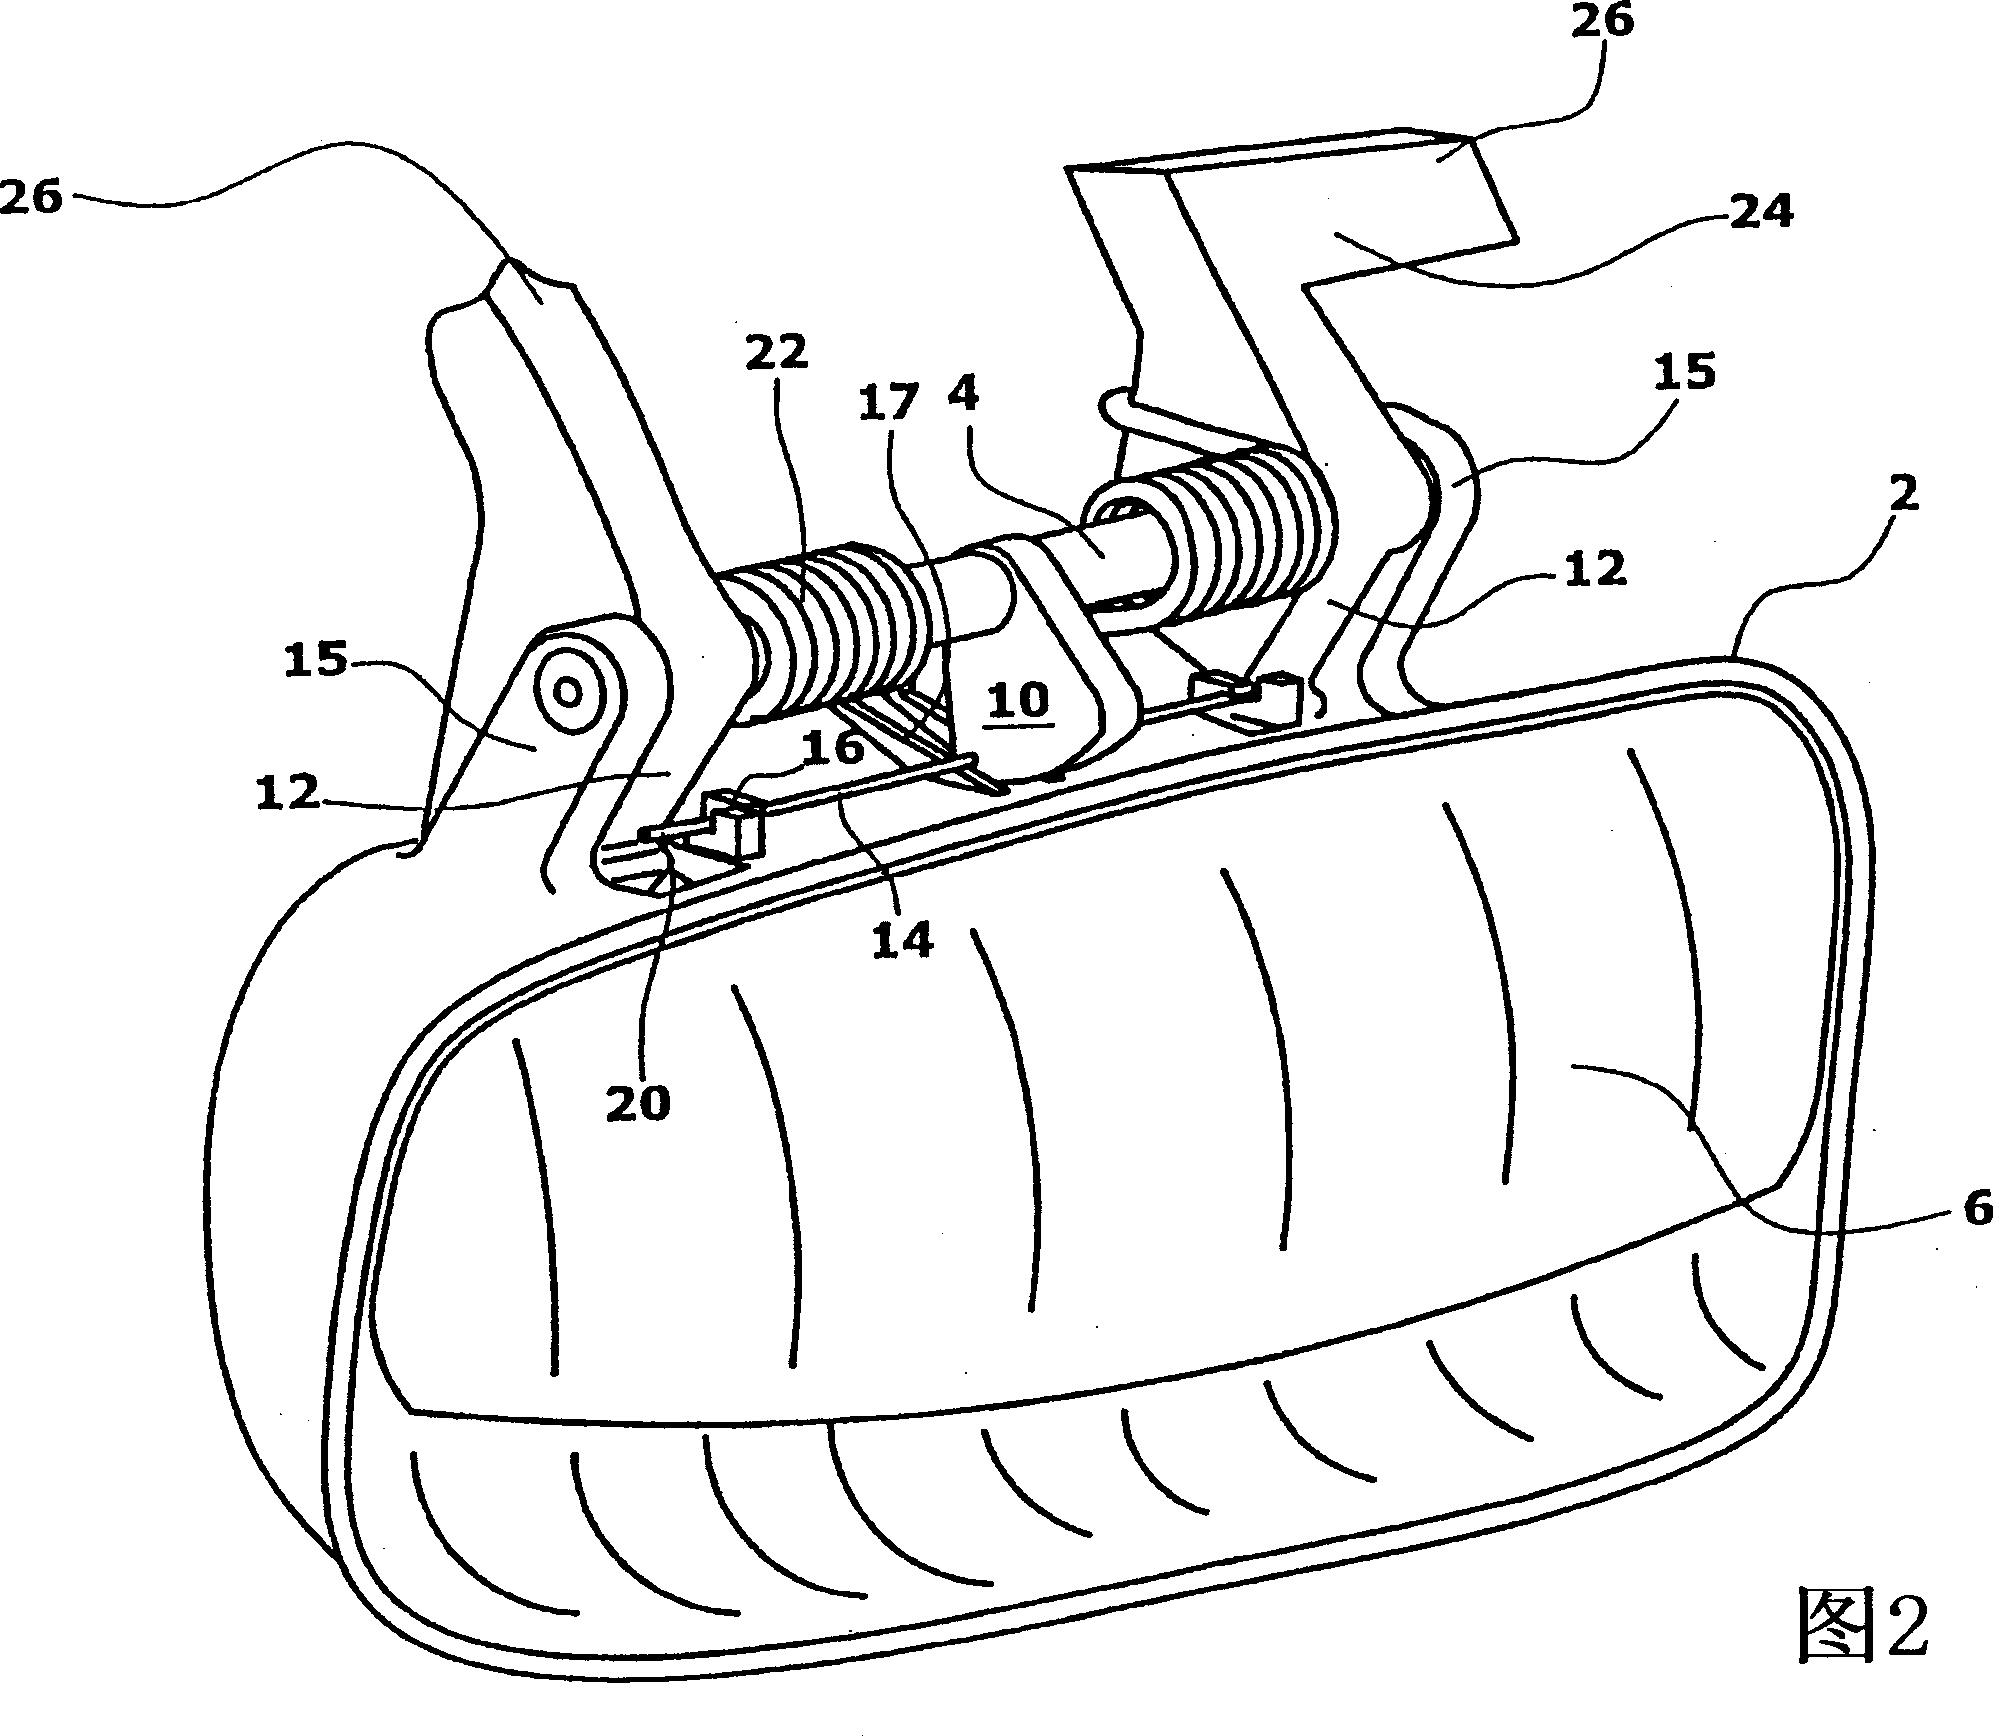 Outside door handle and method for automatically blocking the pivotal motion of an outside door handle in the event of a side impact